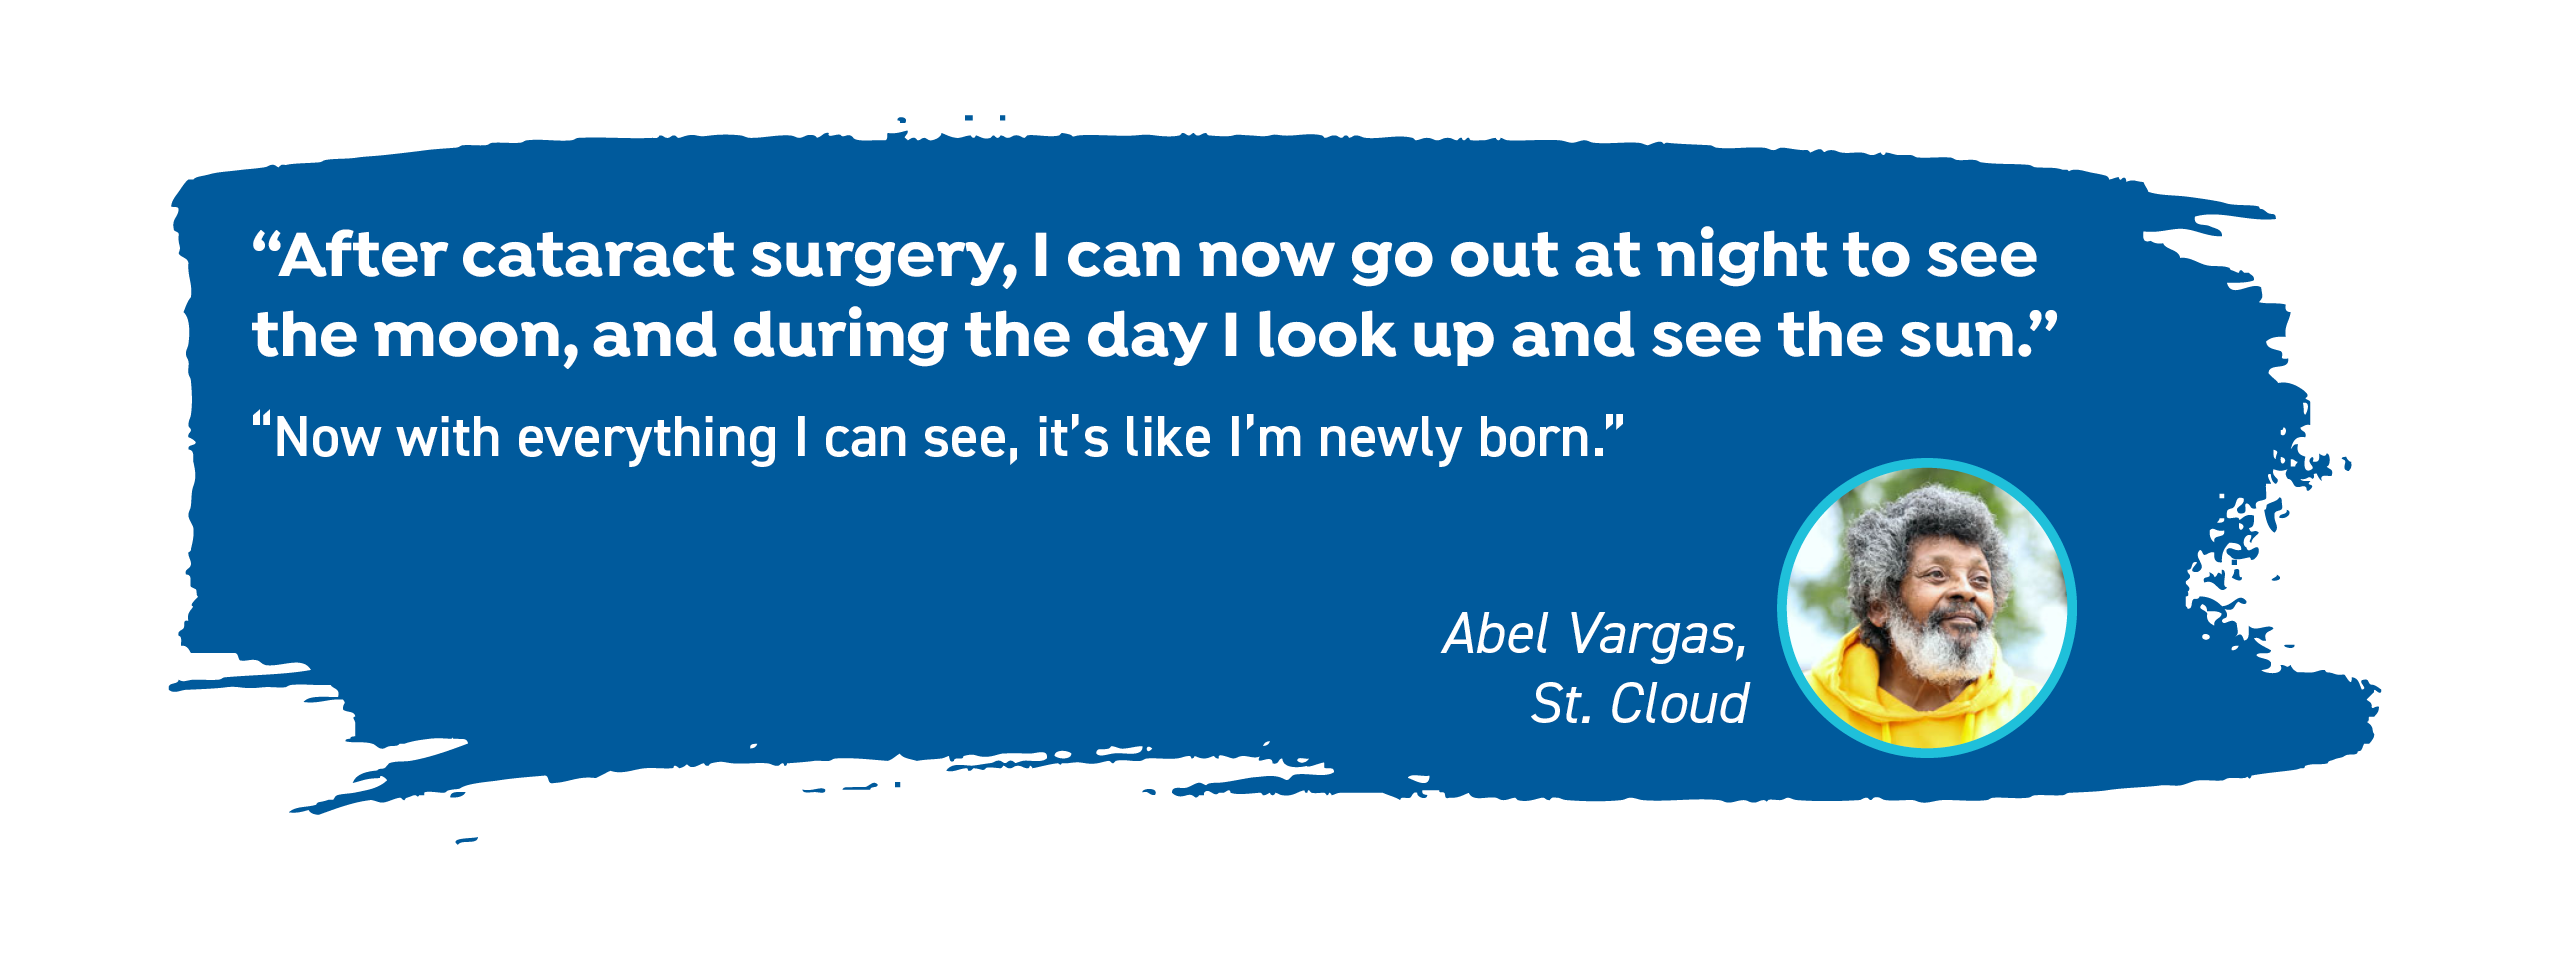 Abel Vargas of St. Cloud says, "After cataract surgery, I can now go out at night to see the moon, and during the day I look up and see the sun. Now with everything I can see, it's like I'm newly born."